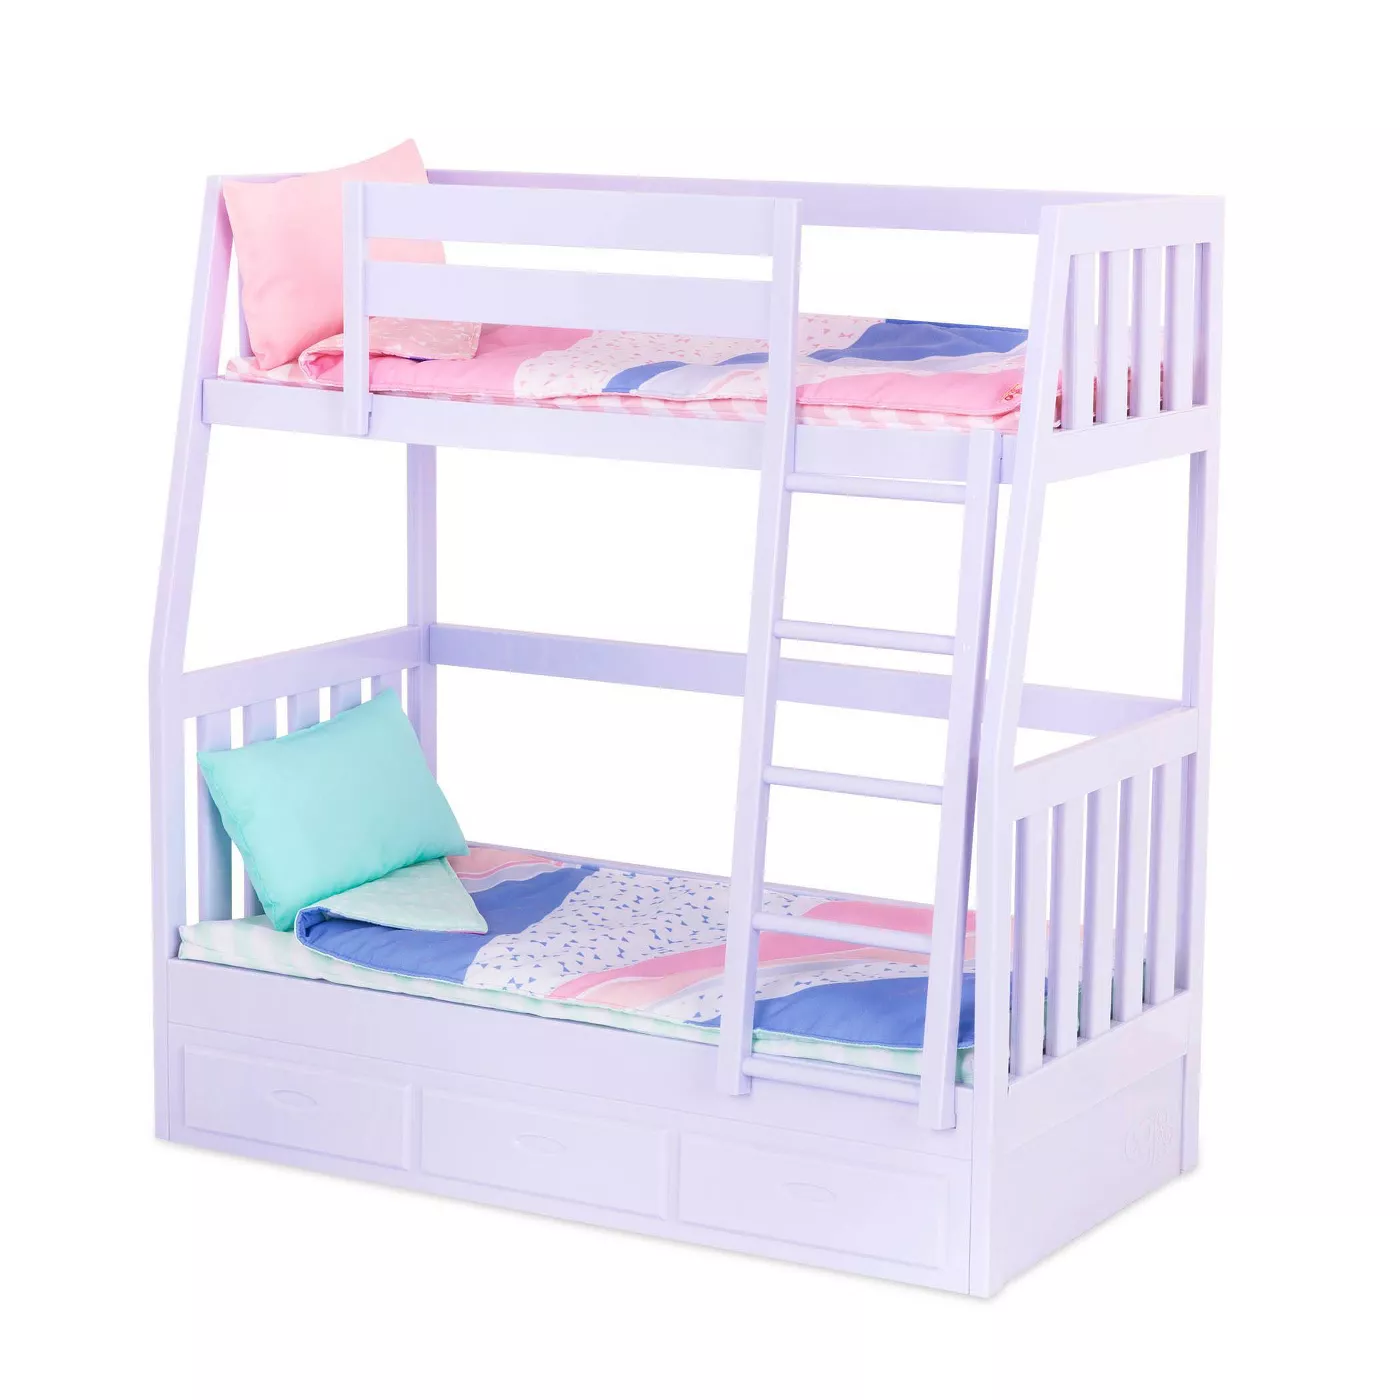 Our Generation Bunk Beds for 18" Dolls - Lilac Dream Bunks - image 1 of 5